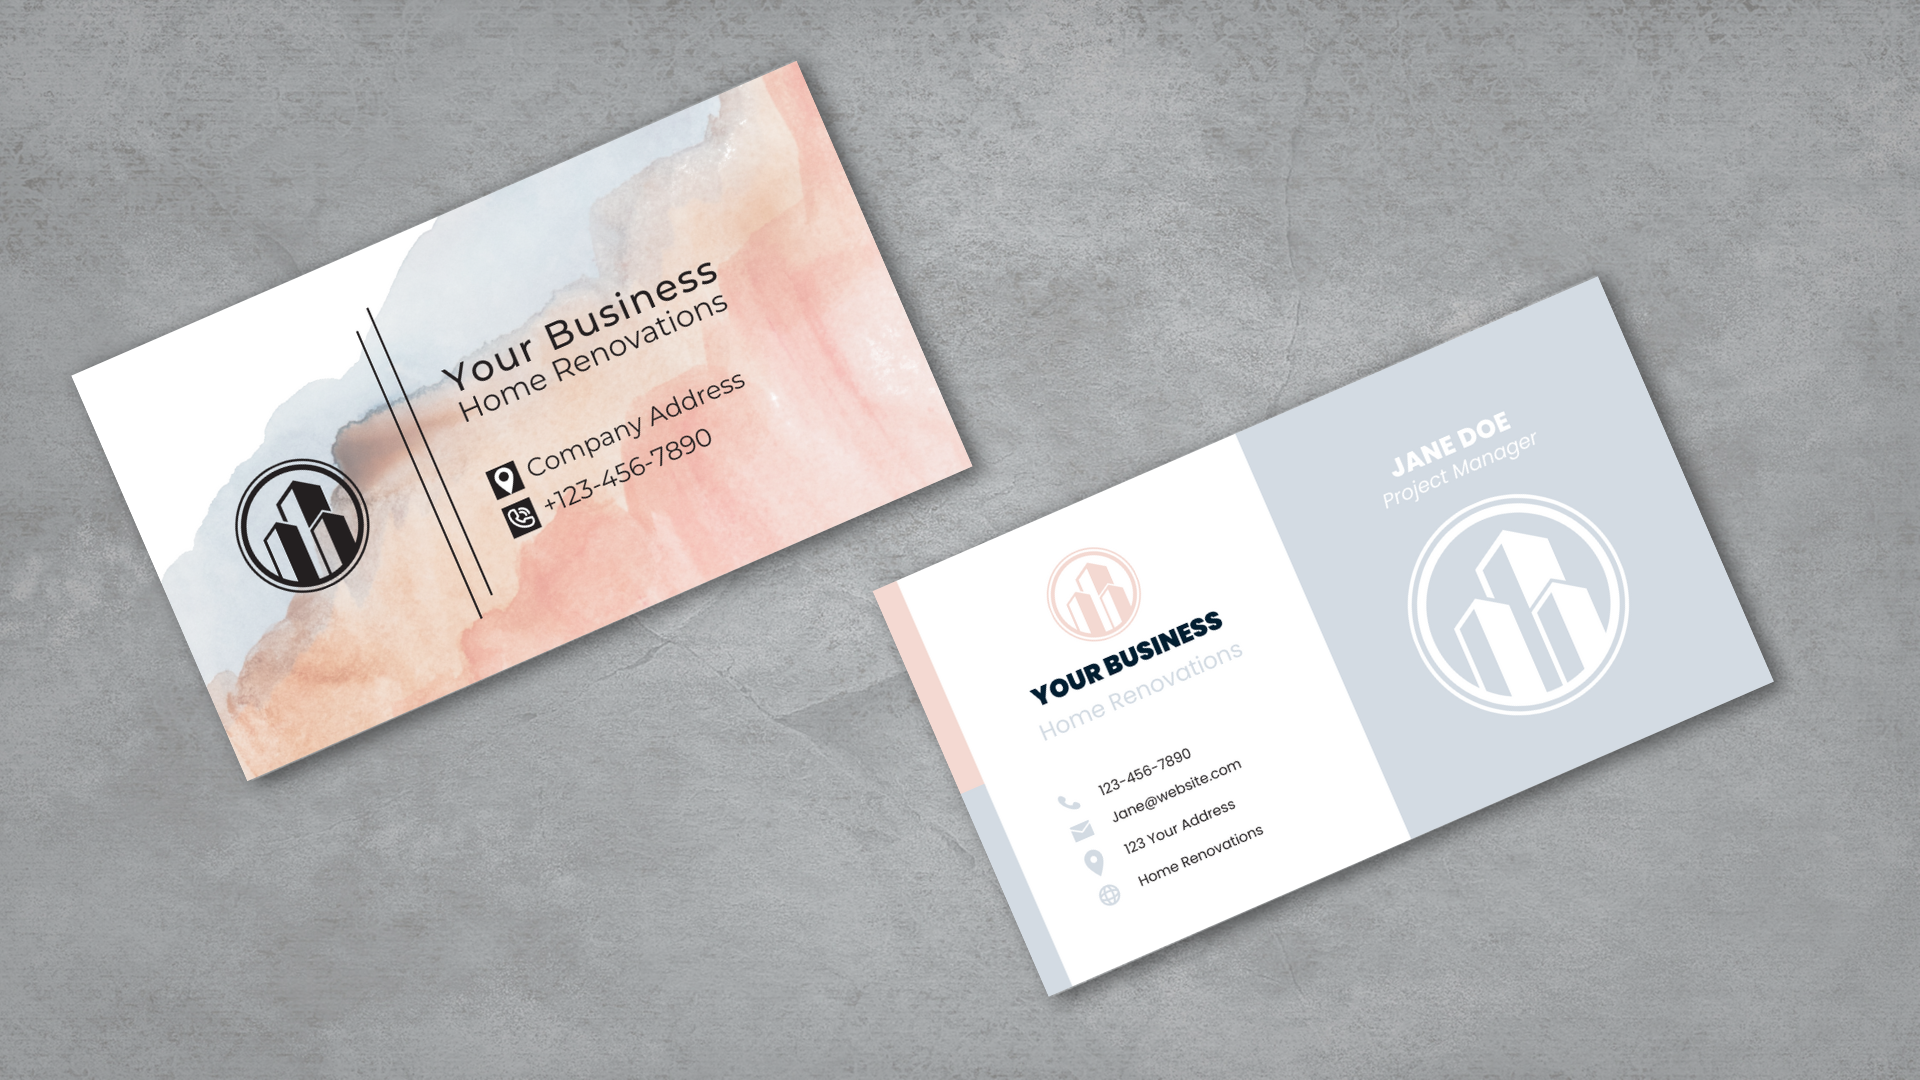 Metallic Business Cards: Making a Lasting Impression